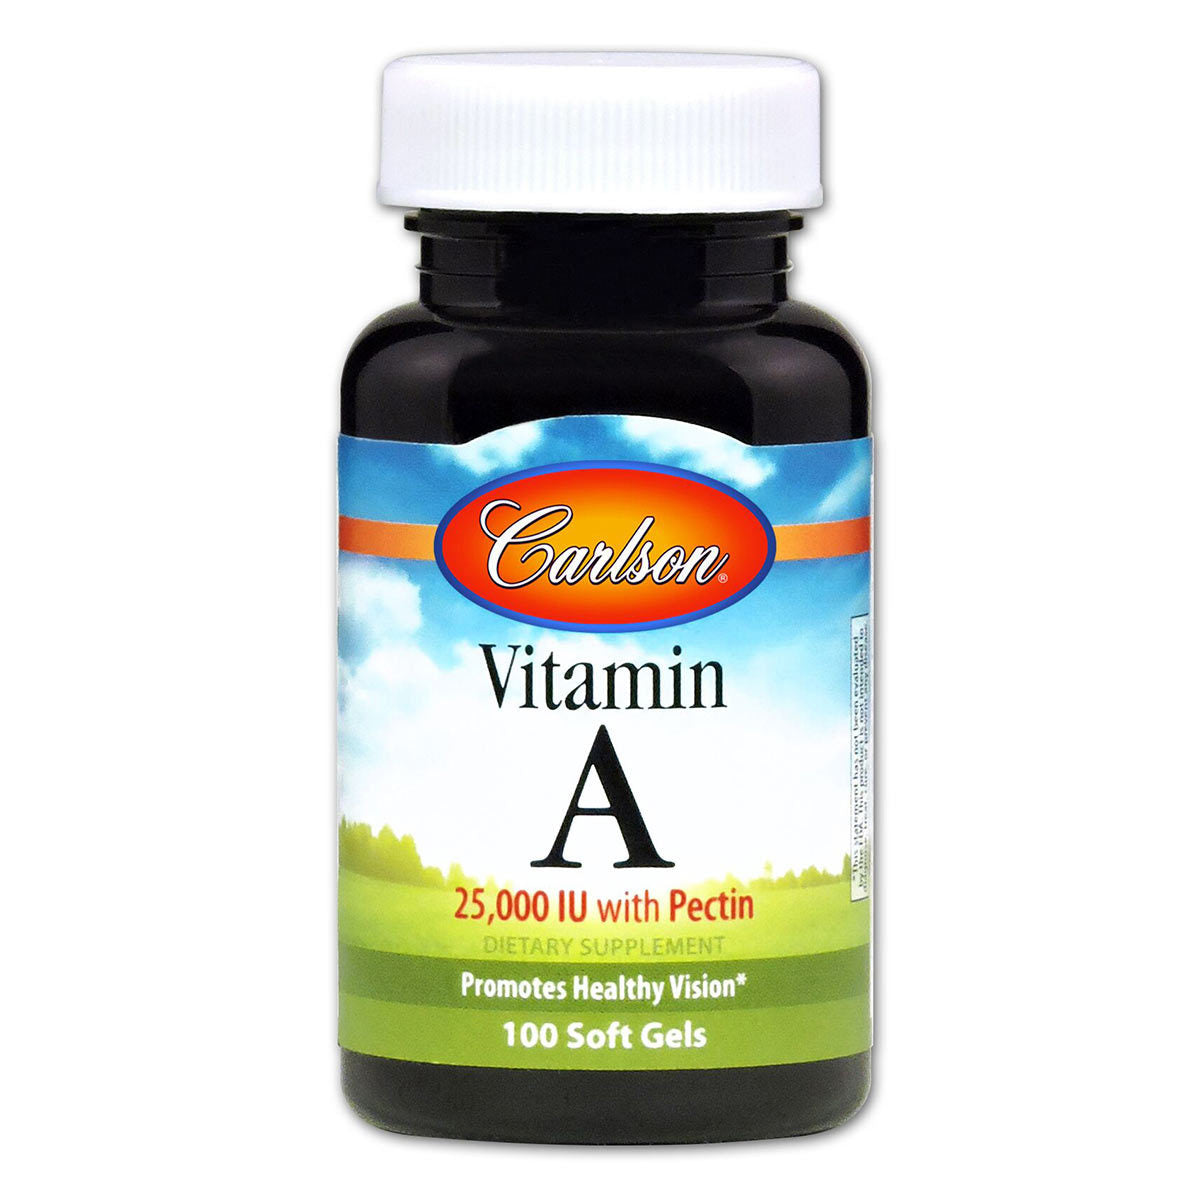 Primary image of Vitamin A with Pectin